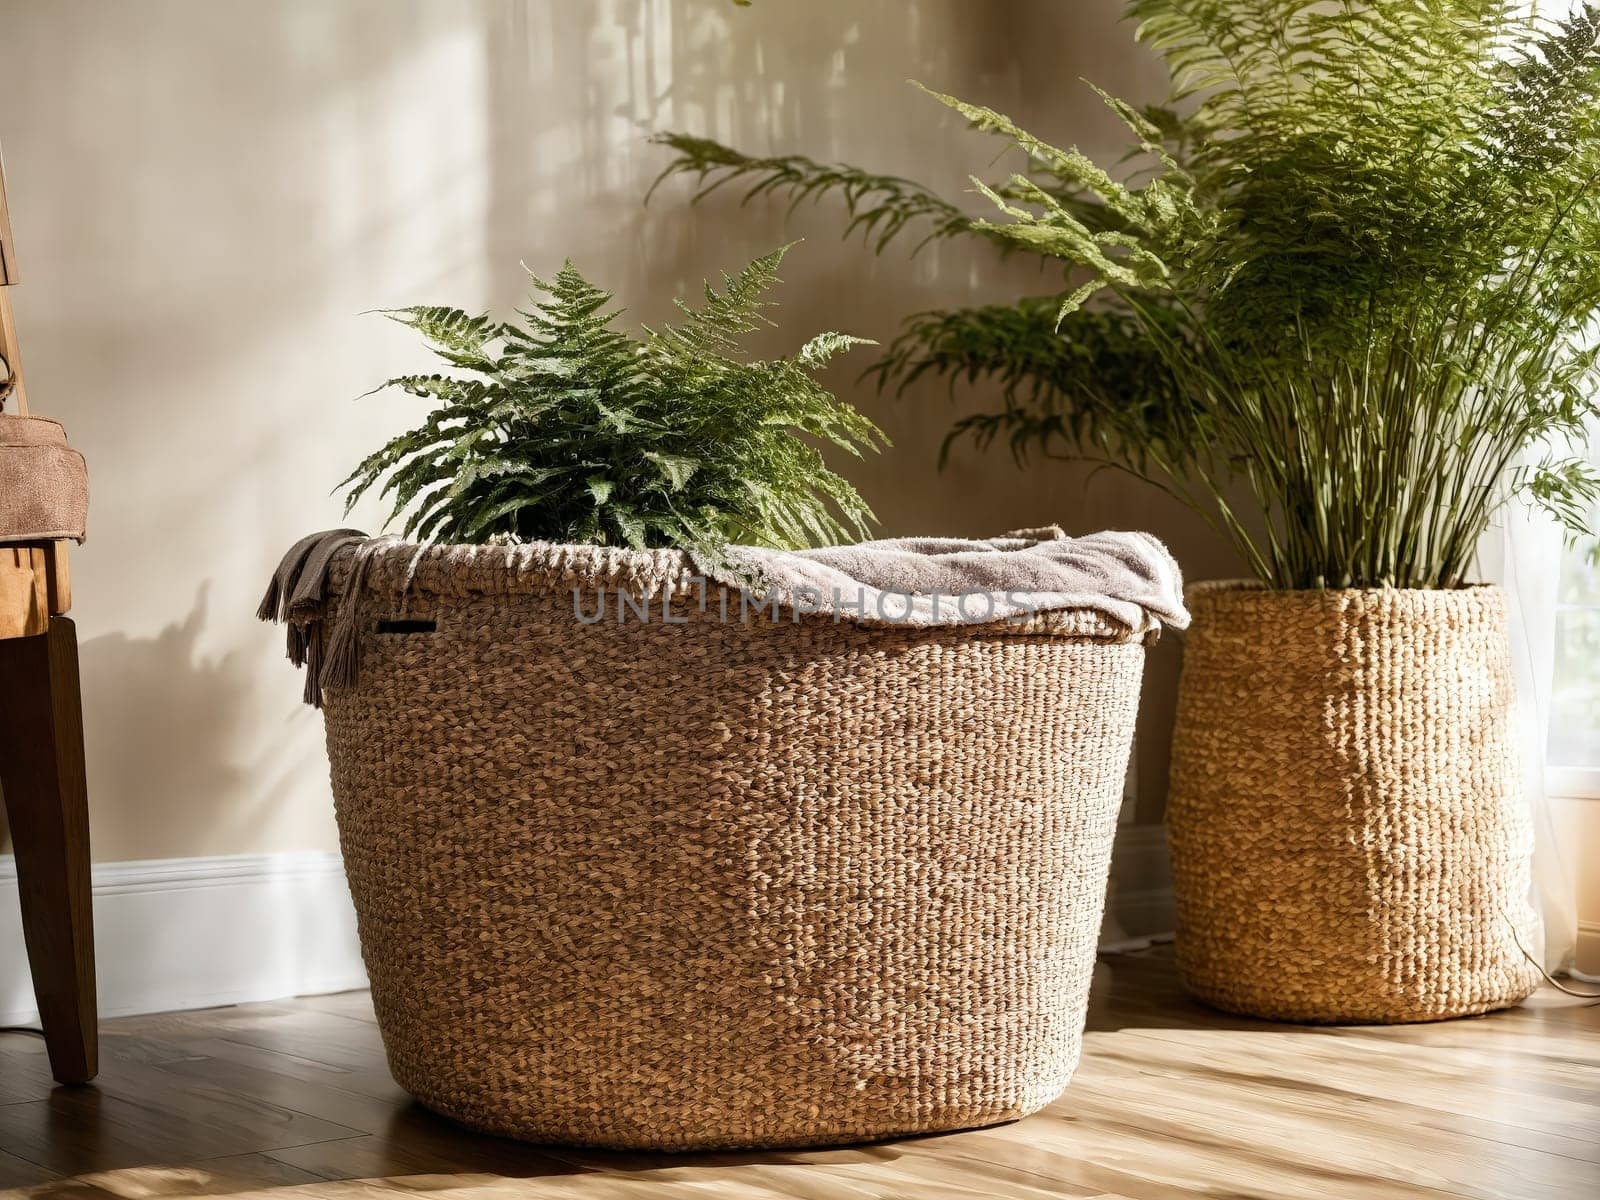 Cozy pedicure station plush taupe chair woven basket filled with towels potted fern soft lamp by panophotograph